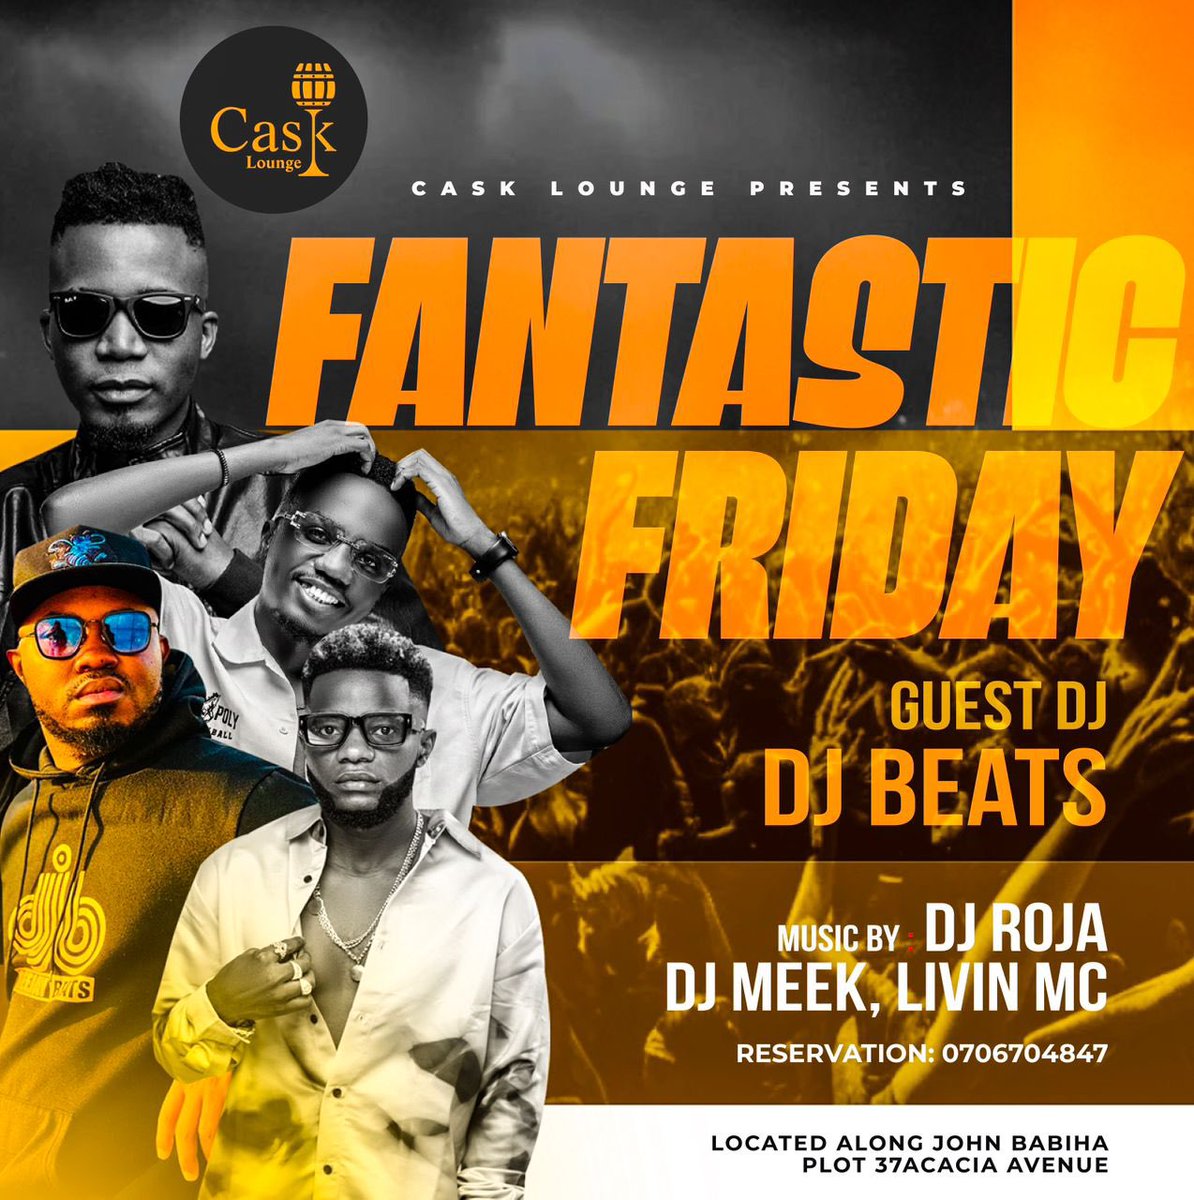 Join us tonight for another electrifying edition of #FantasticFridays! 🎶 Kampala’s top DJs are ready to spin the hottest beats, with hype provided by none other than @OneLivinMc 🎤🔊🔥